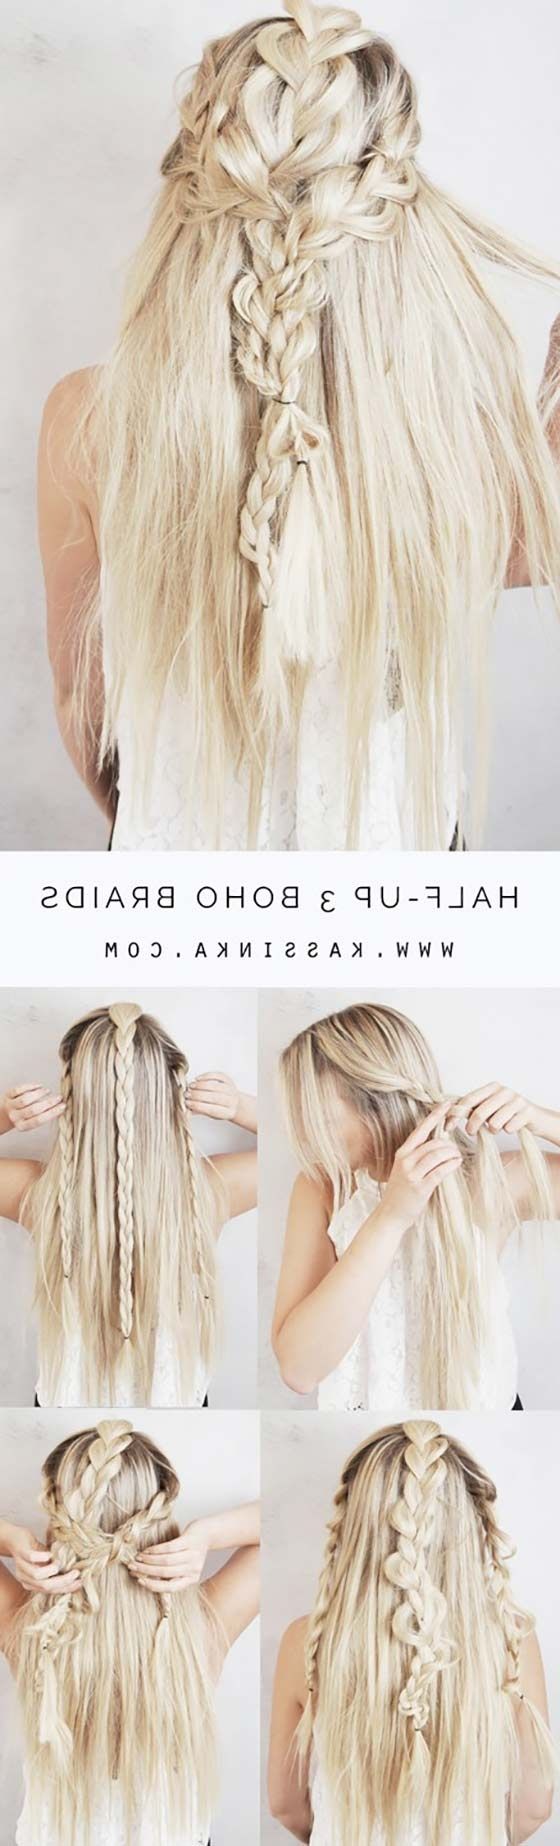 40 Braided Hairstyles For Long Hair With Regard To Fashionable Long Braided Hairstyles (View 4 of 15)